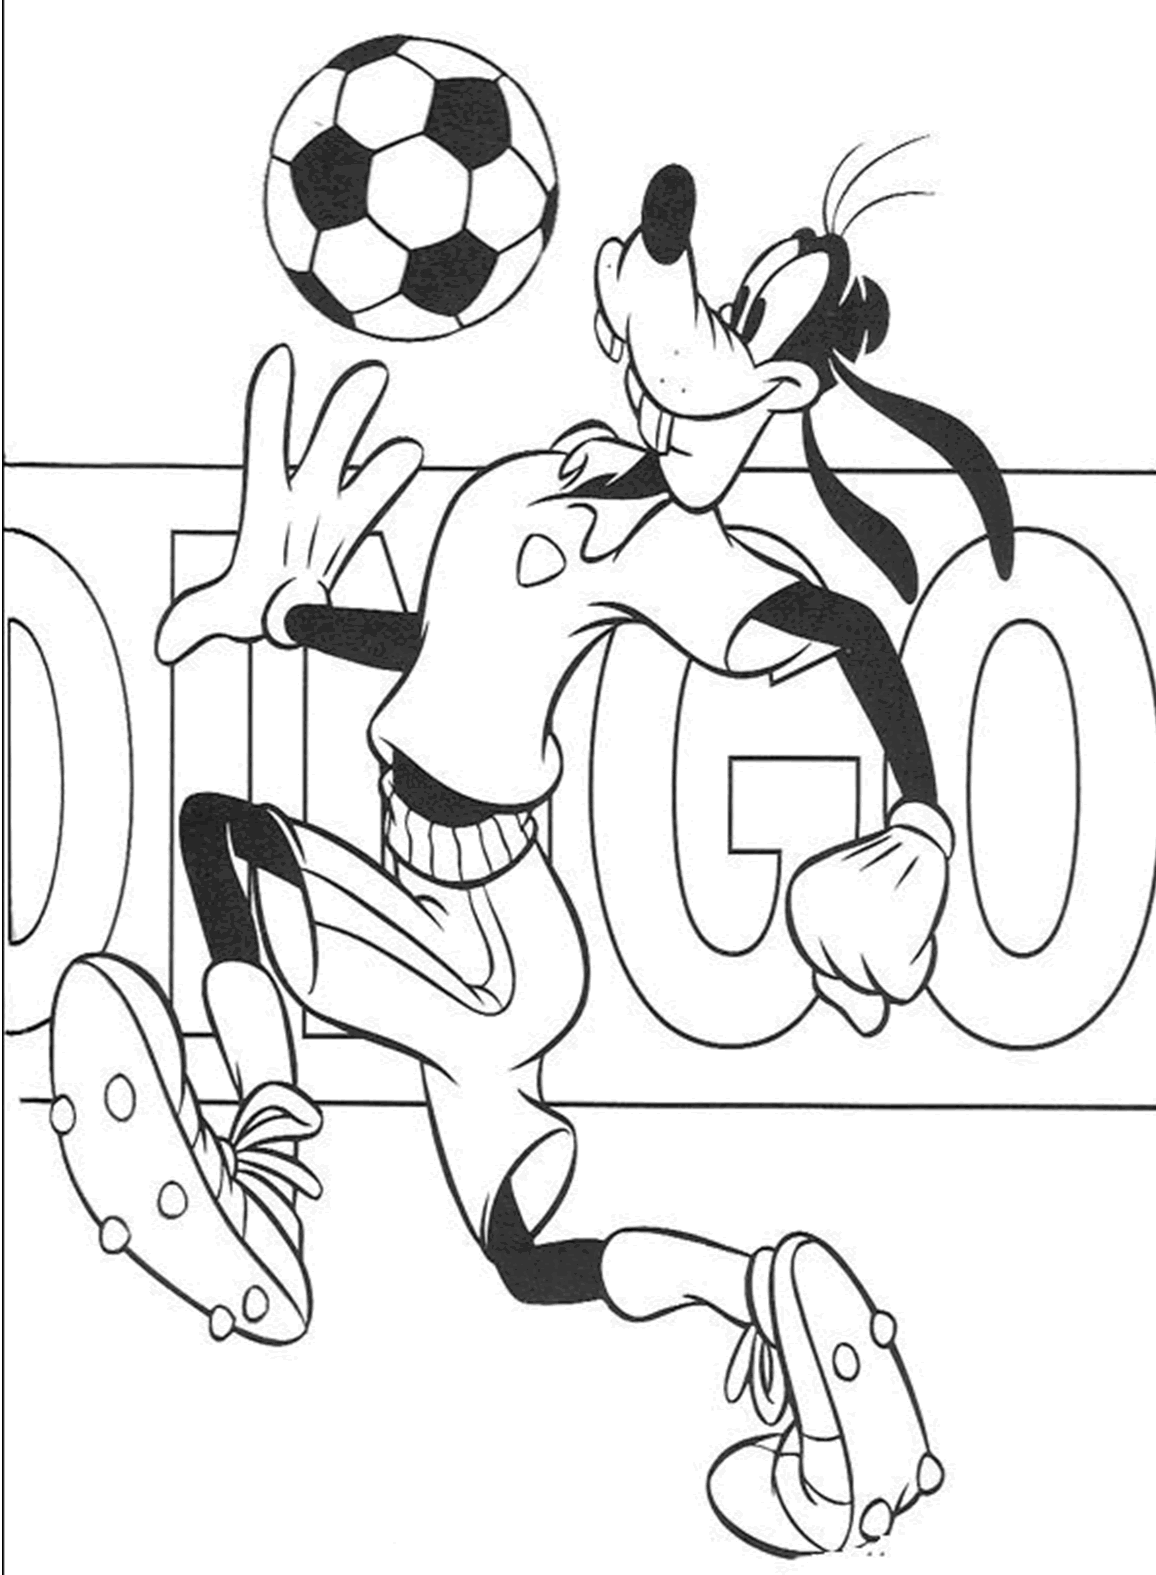 Goofy Coloring Pages Cartoons Goofy To Print Printable 2020 3033 Coloring4free